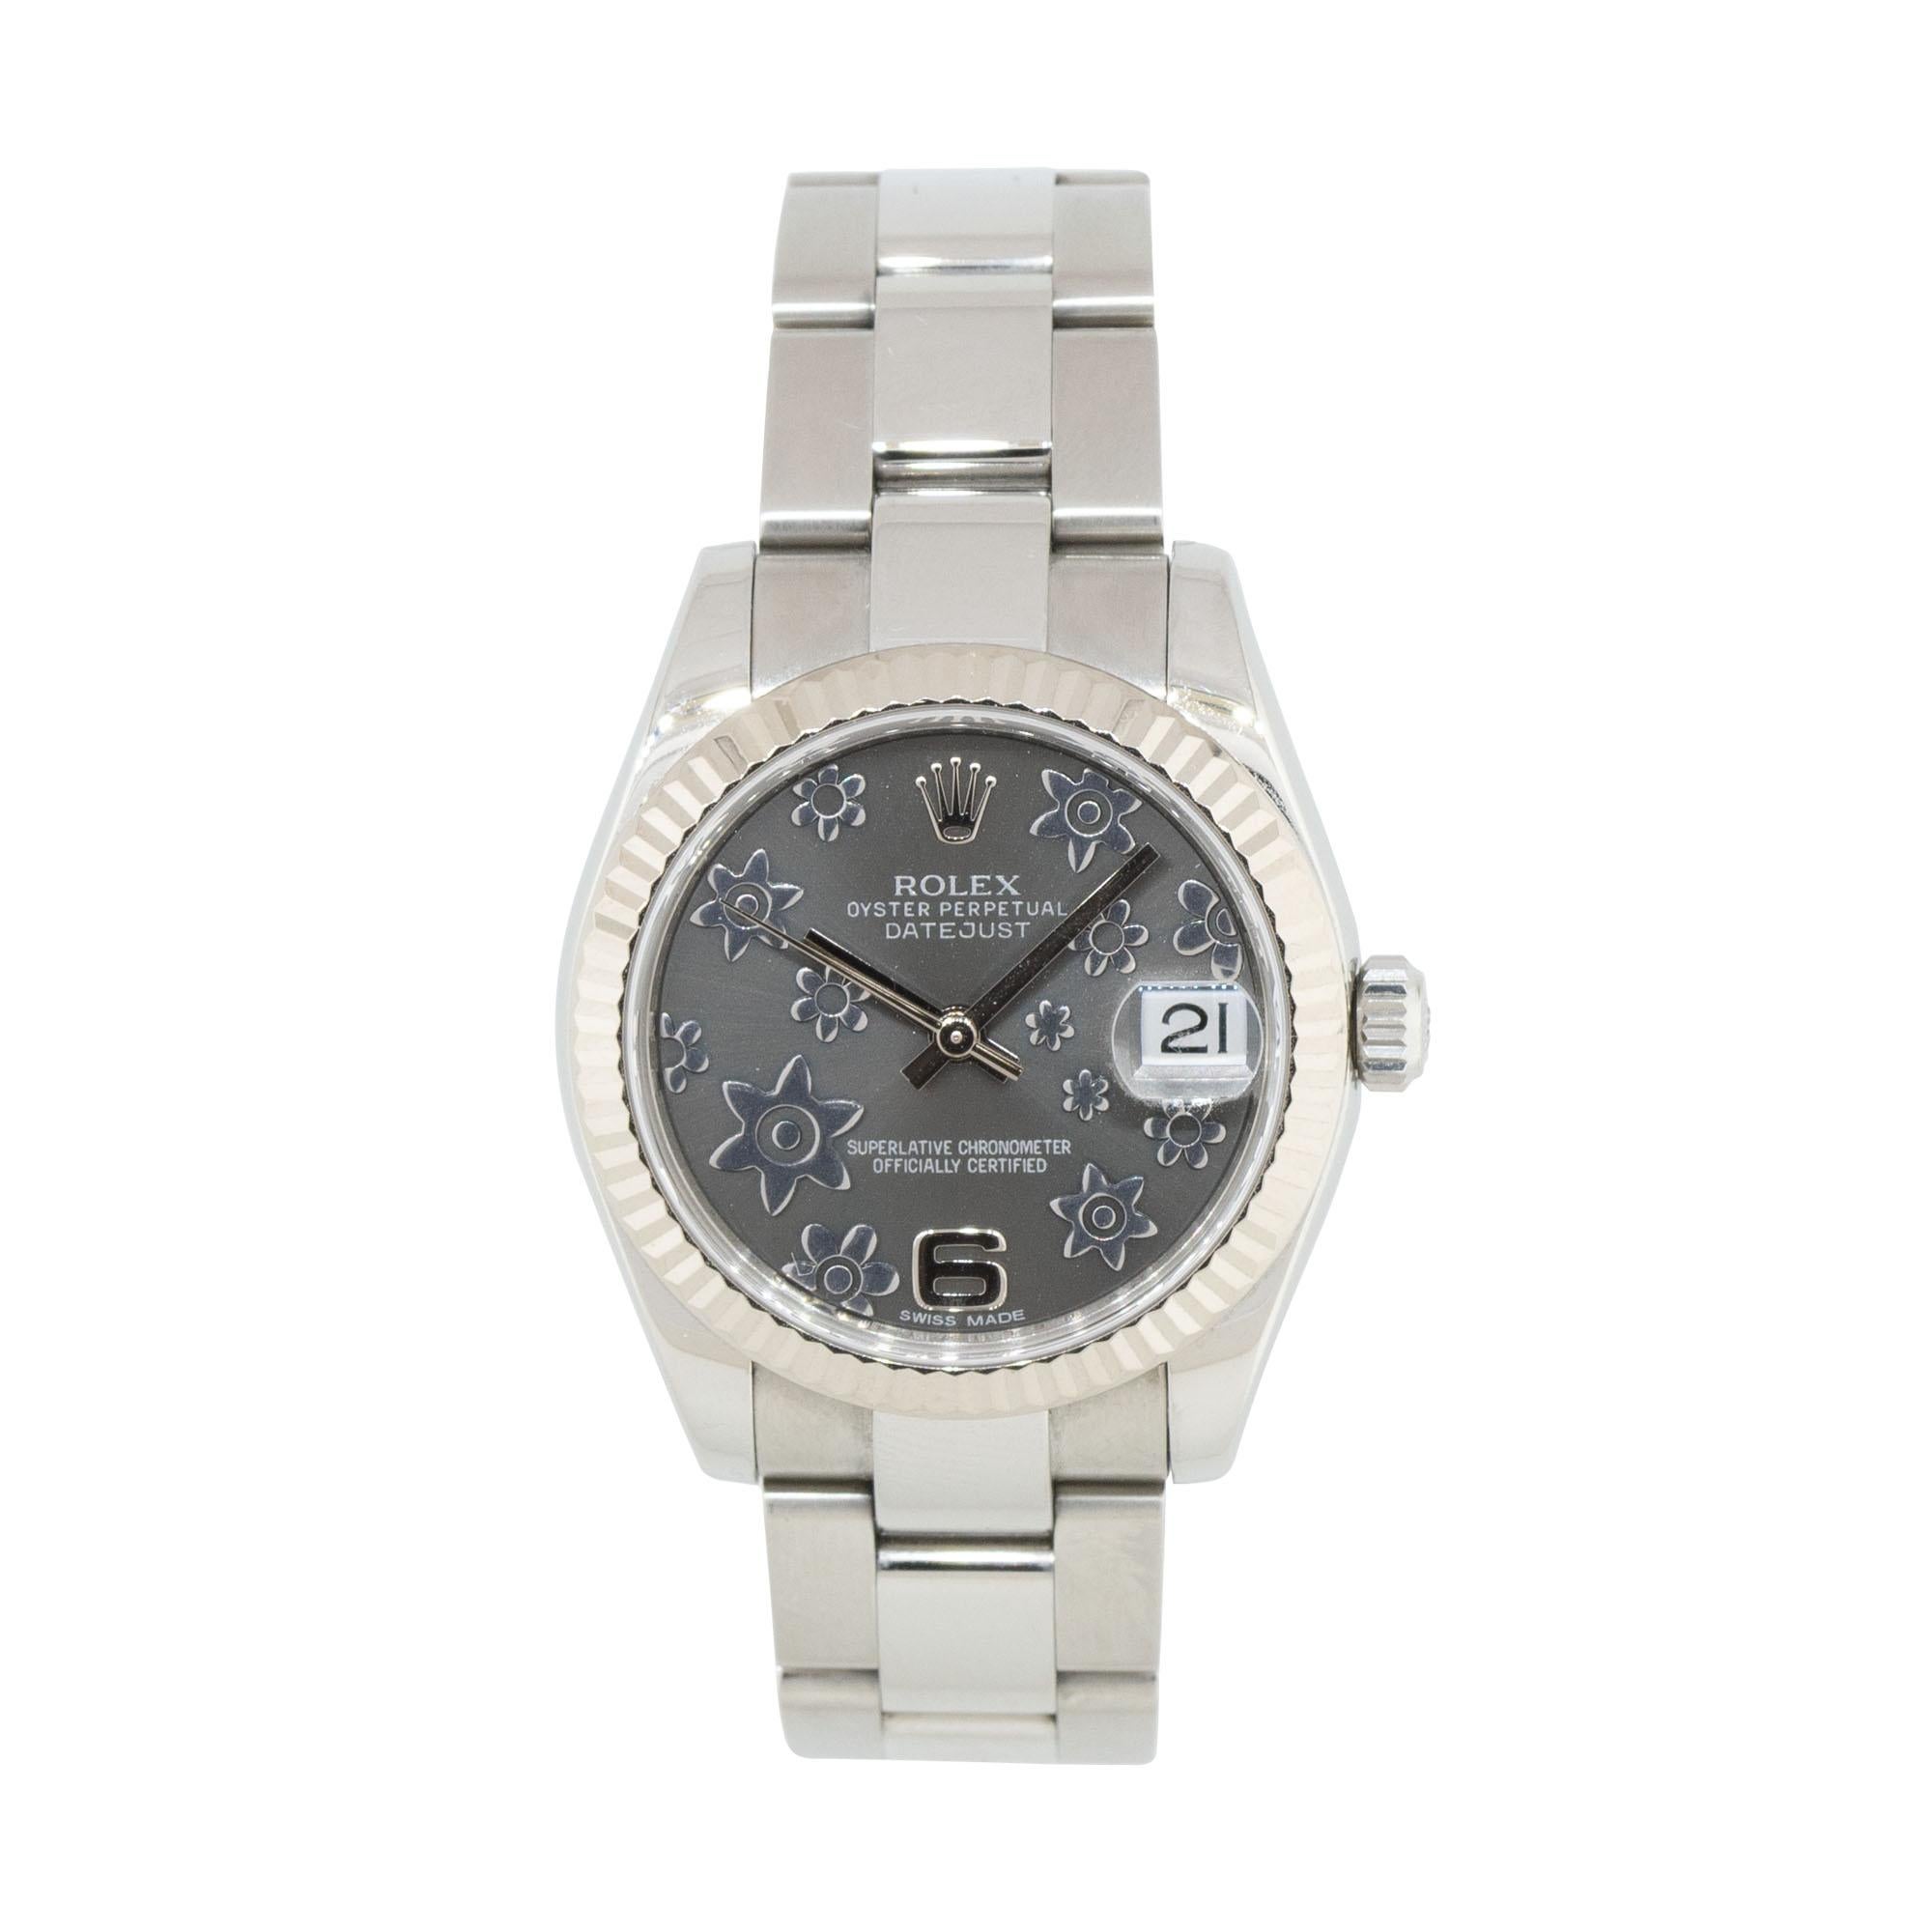 Rolex 178274 Datejust 31mm Stainless Steel Floral Dial Watch
The Rolex 178274 Datejust with a floral dial is a striking embodiment of timeless elegance and distinctive design, making it a sought-after choice for women who appreciate both style and